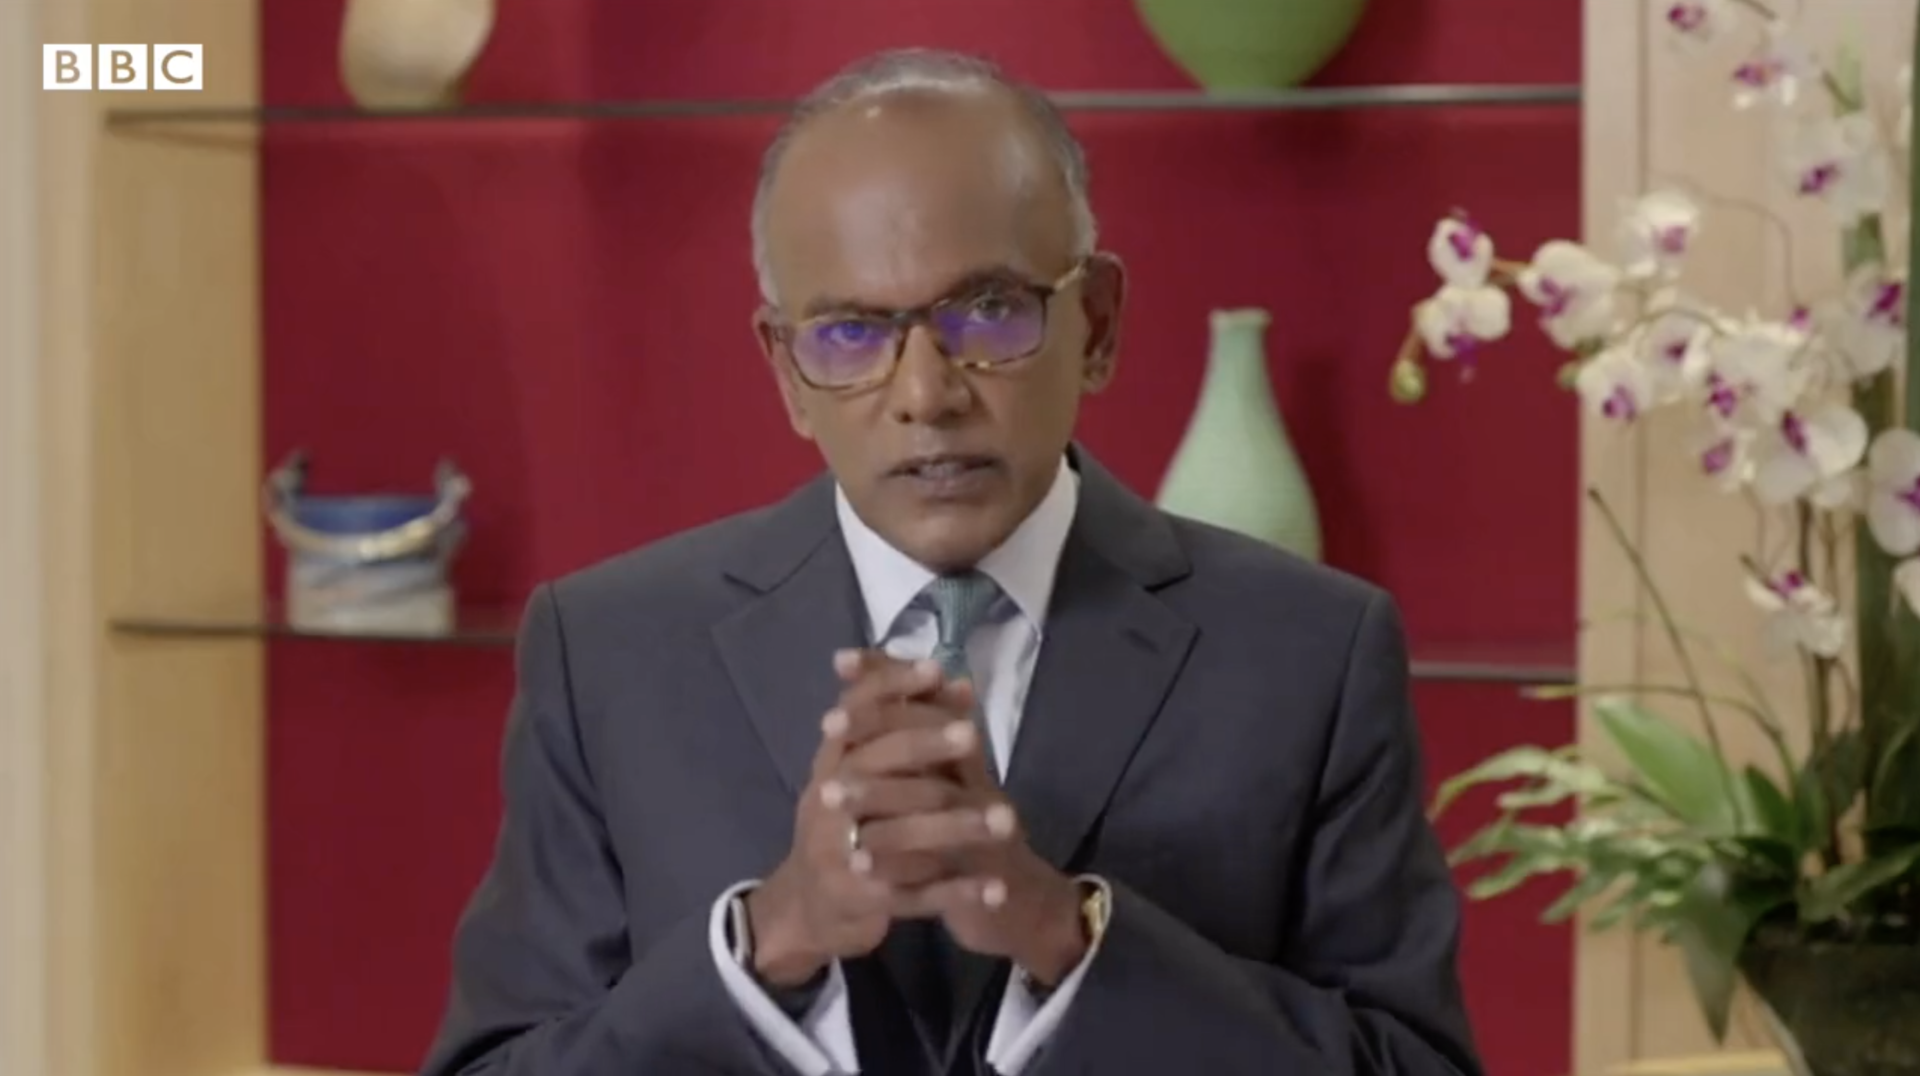 Singapore Minister K Shanmugam fiercely defends country’s draconian drug laws during heated BBC interview